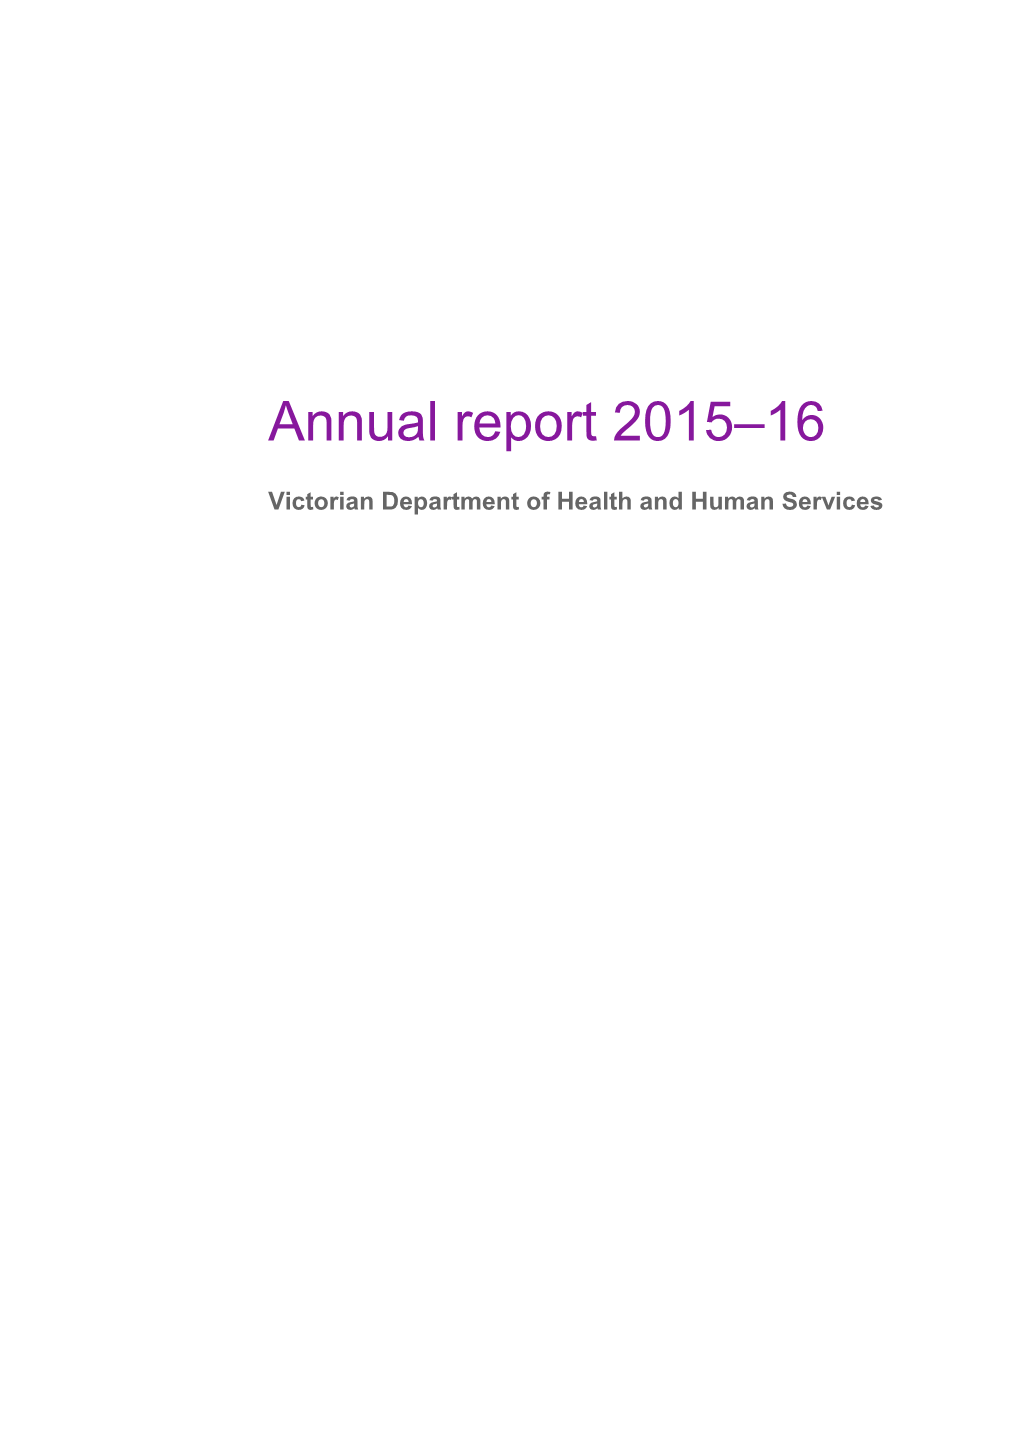 Annual Report 2015-16: Victorian Department of Health and Human Services - 01 Operation Report